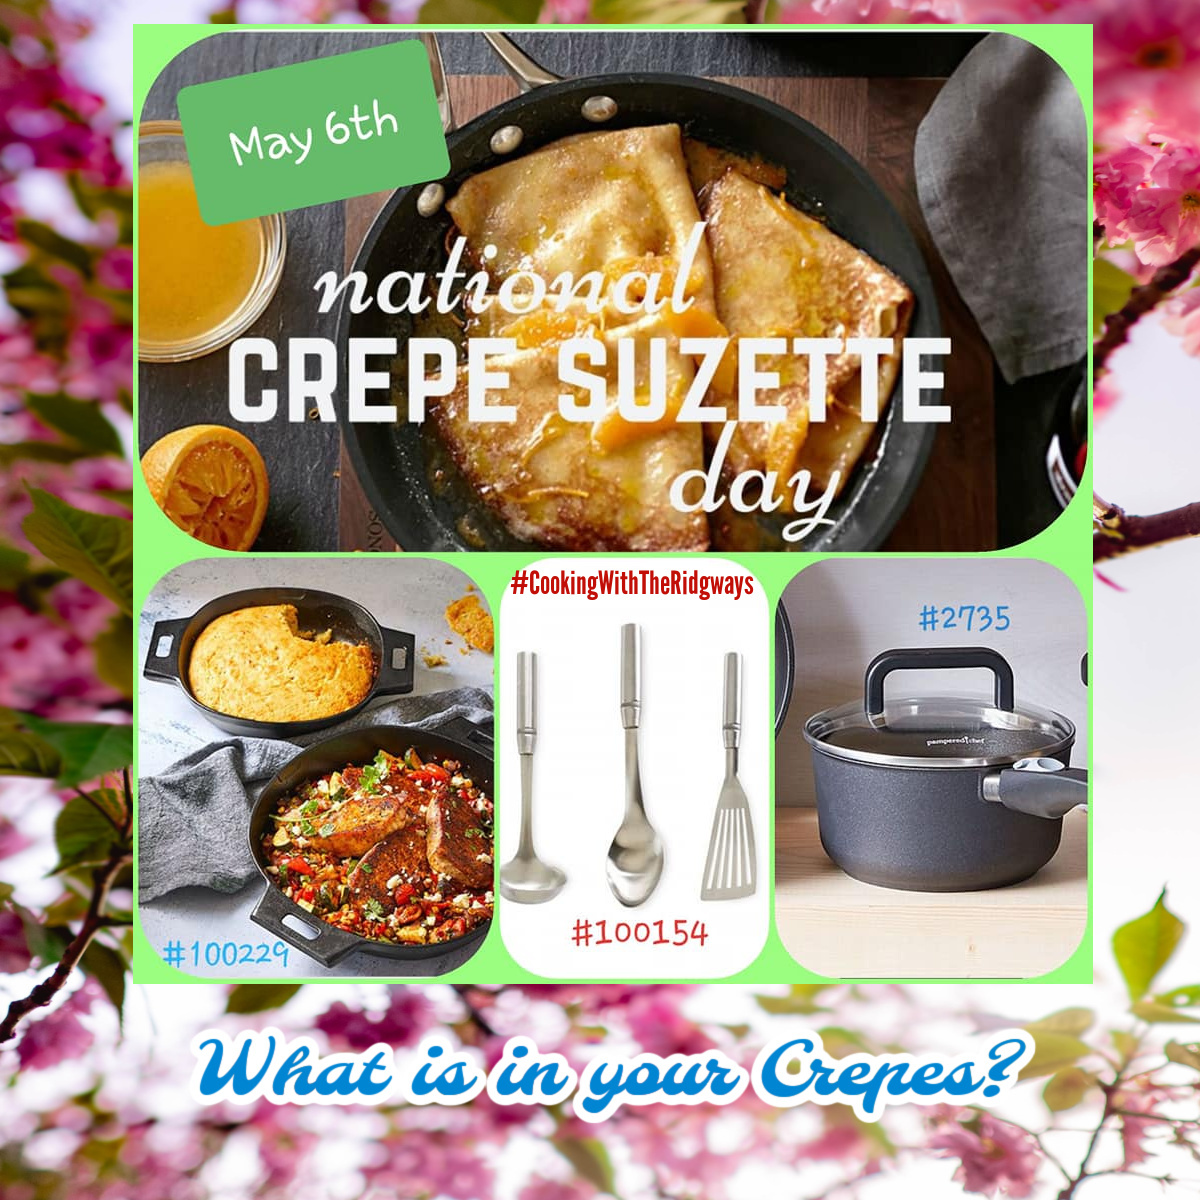 Did you know that Crepe Suzette is actually a dessert? Sounds amazing right? 
Gordon Ramsay makes it look so easy  https://t.co/X787hTHypp   could you make this? 

#cookingwiththeridgways  #pamperedchef  #nationalfooddays https://t.co/gRCdCyoGyr